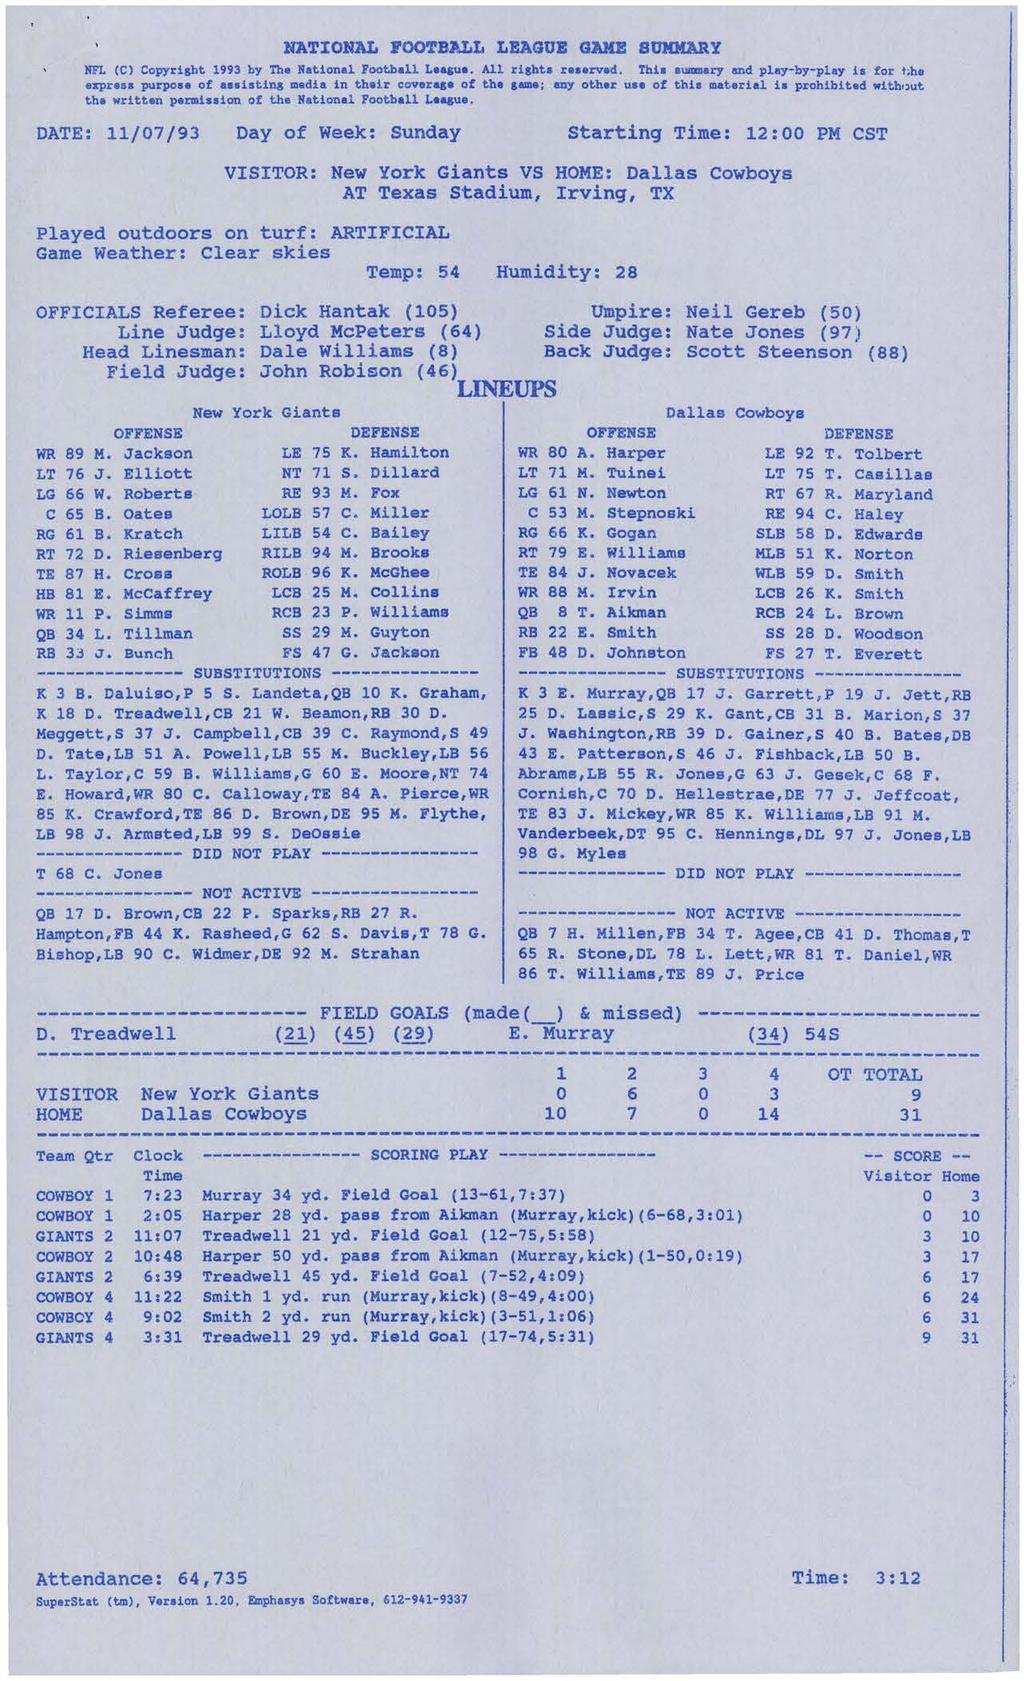 NATIONAL FOOTBALL LEAGUE GAME SUMMARY NFL (C) Copyright 1993 by The National Football League. All rishts reserved. This summary and play-by-play is for t.